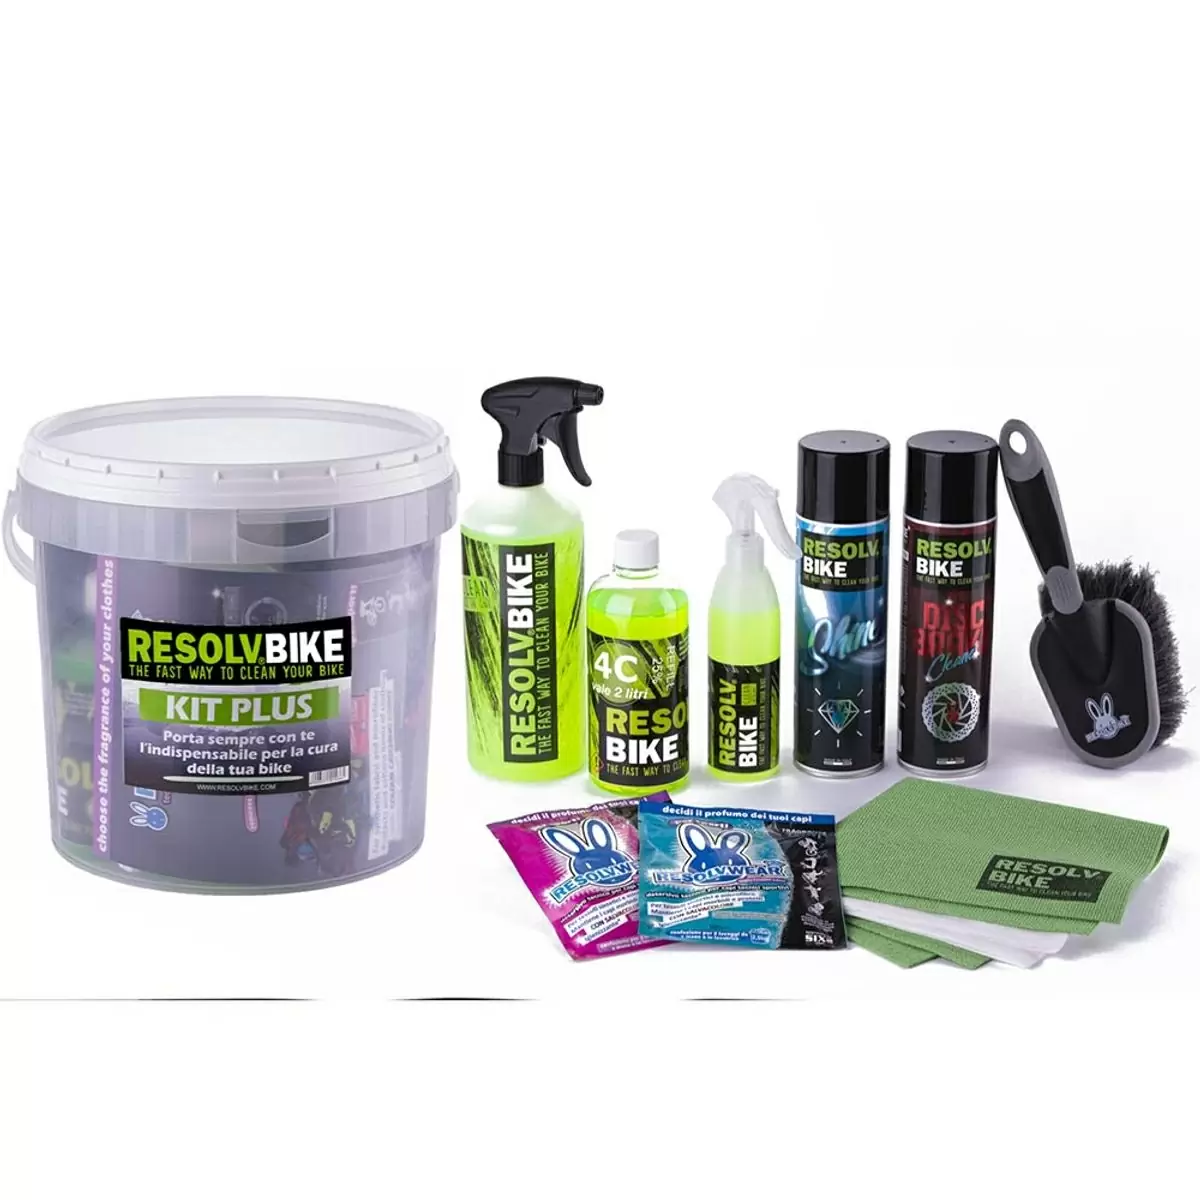 Bucket Plus Kit For Complete Bike Care - image